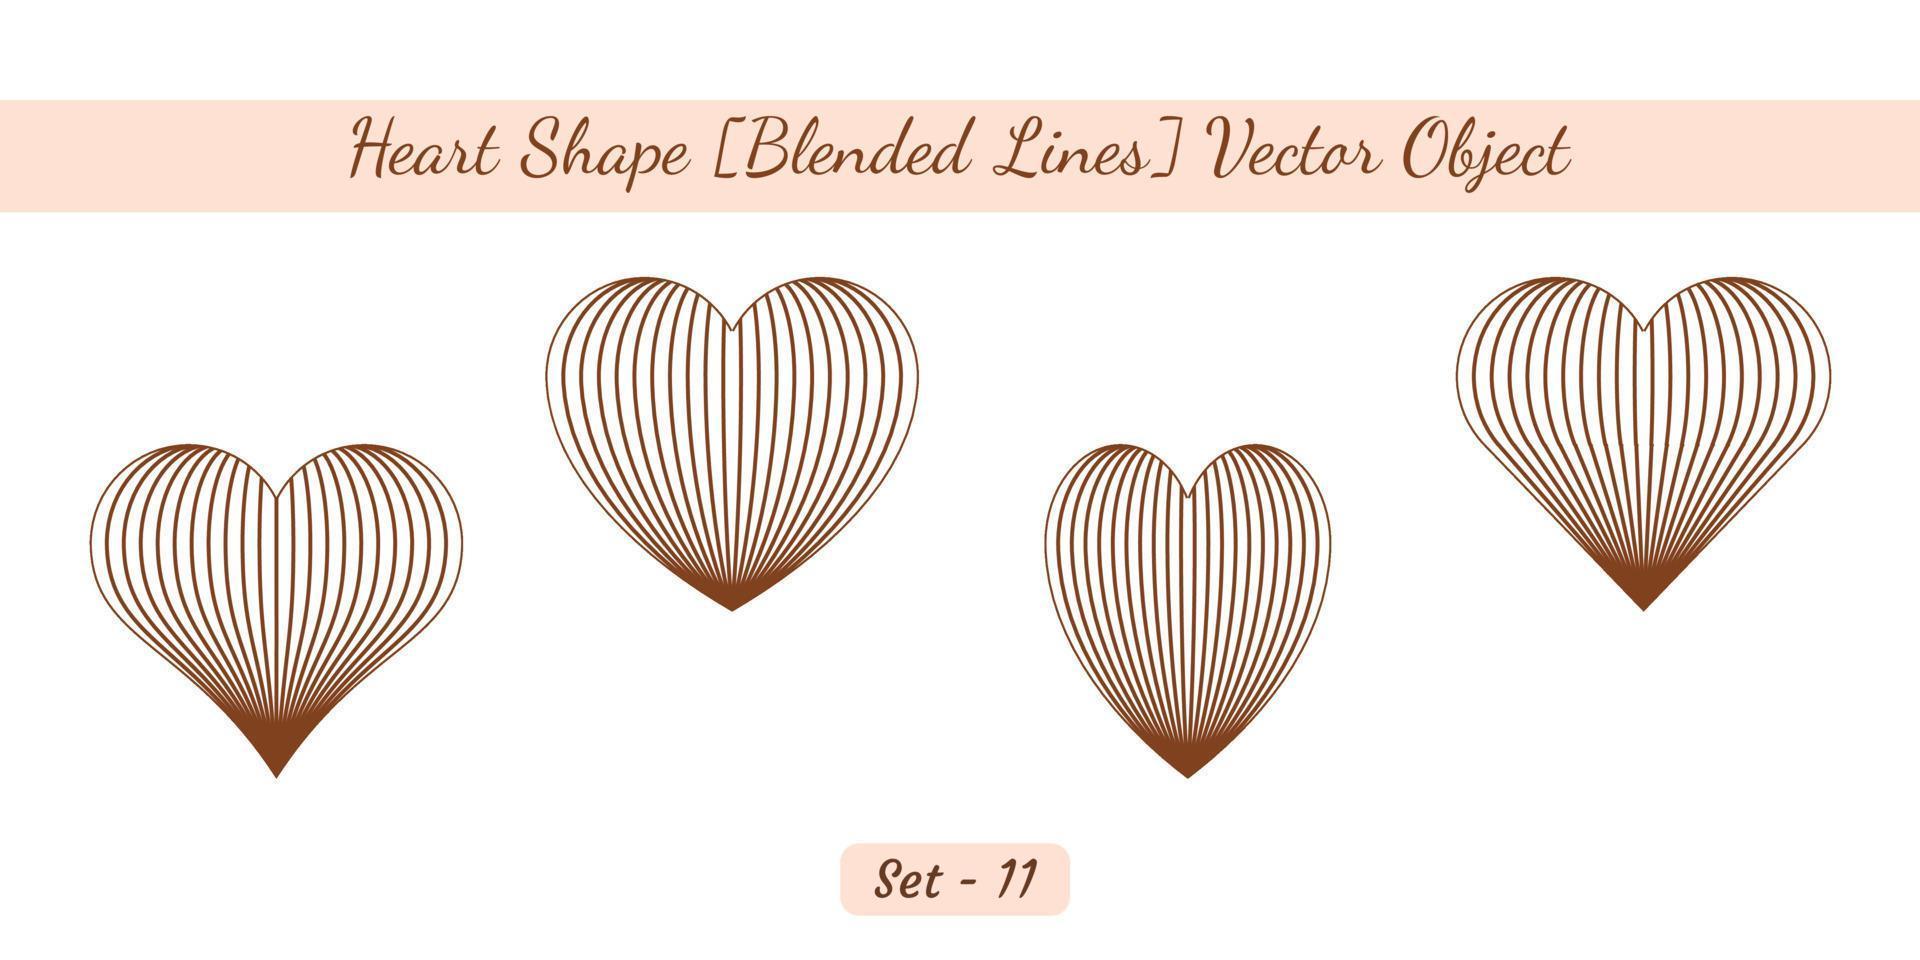 Heart shape object set created with Simple Blended lines, Heart shape vector object set created on white background.